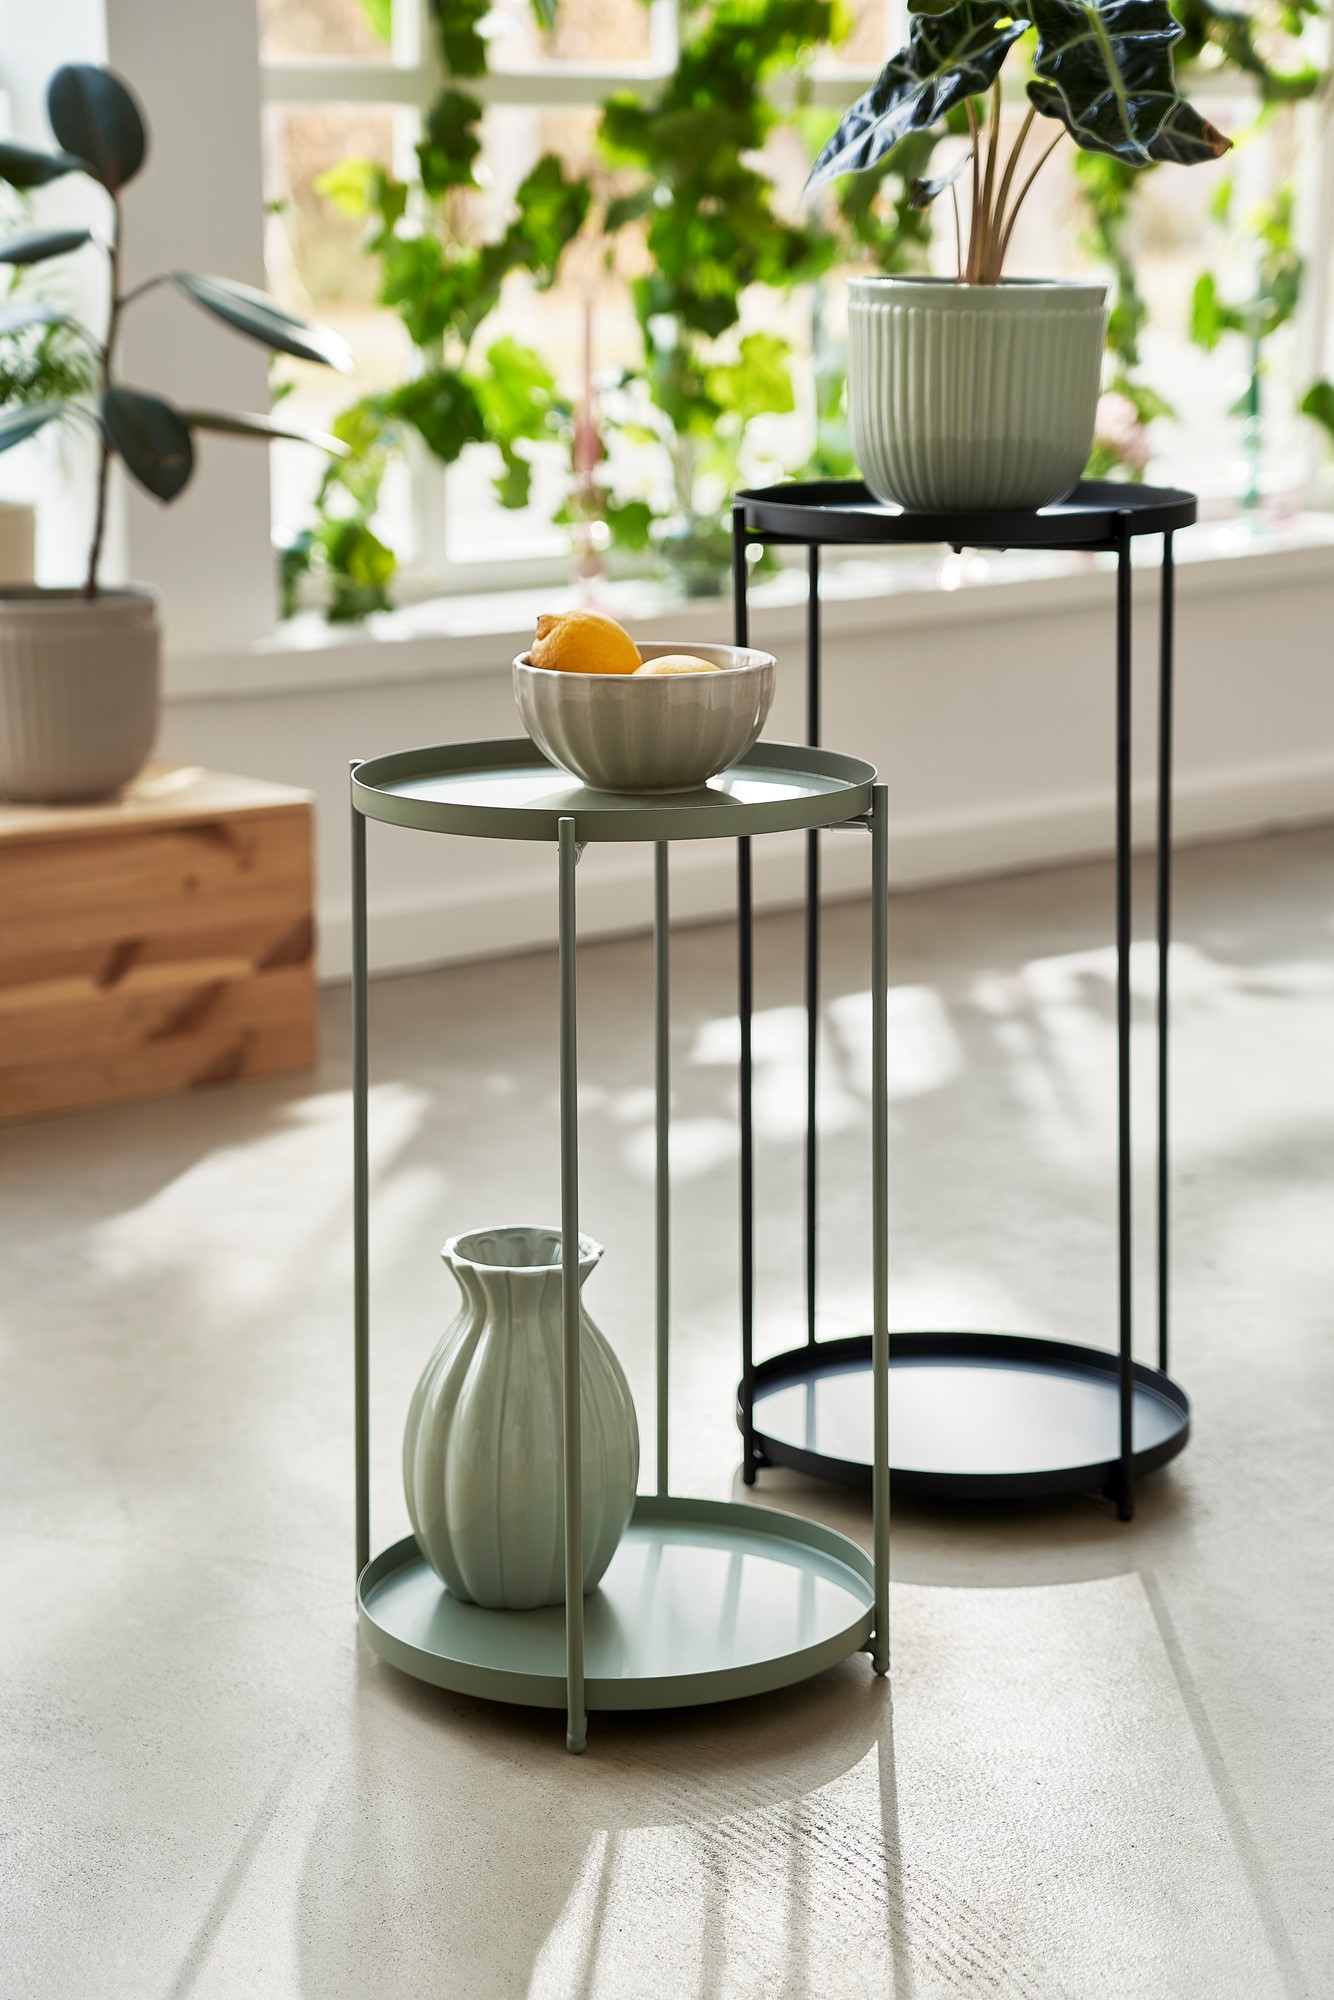 Plant stand